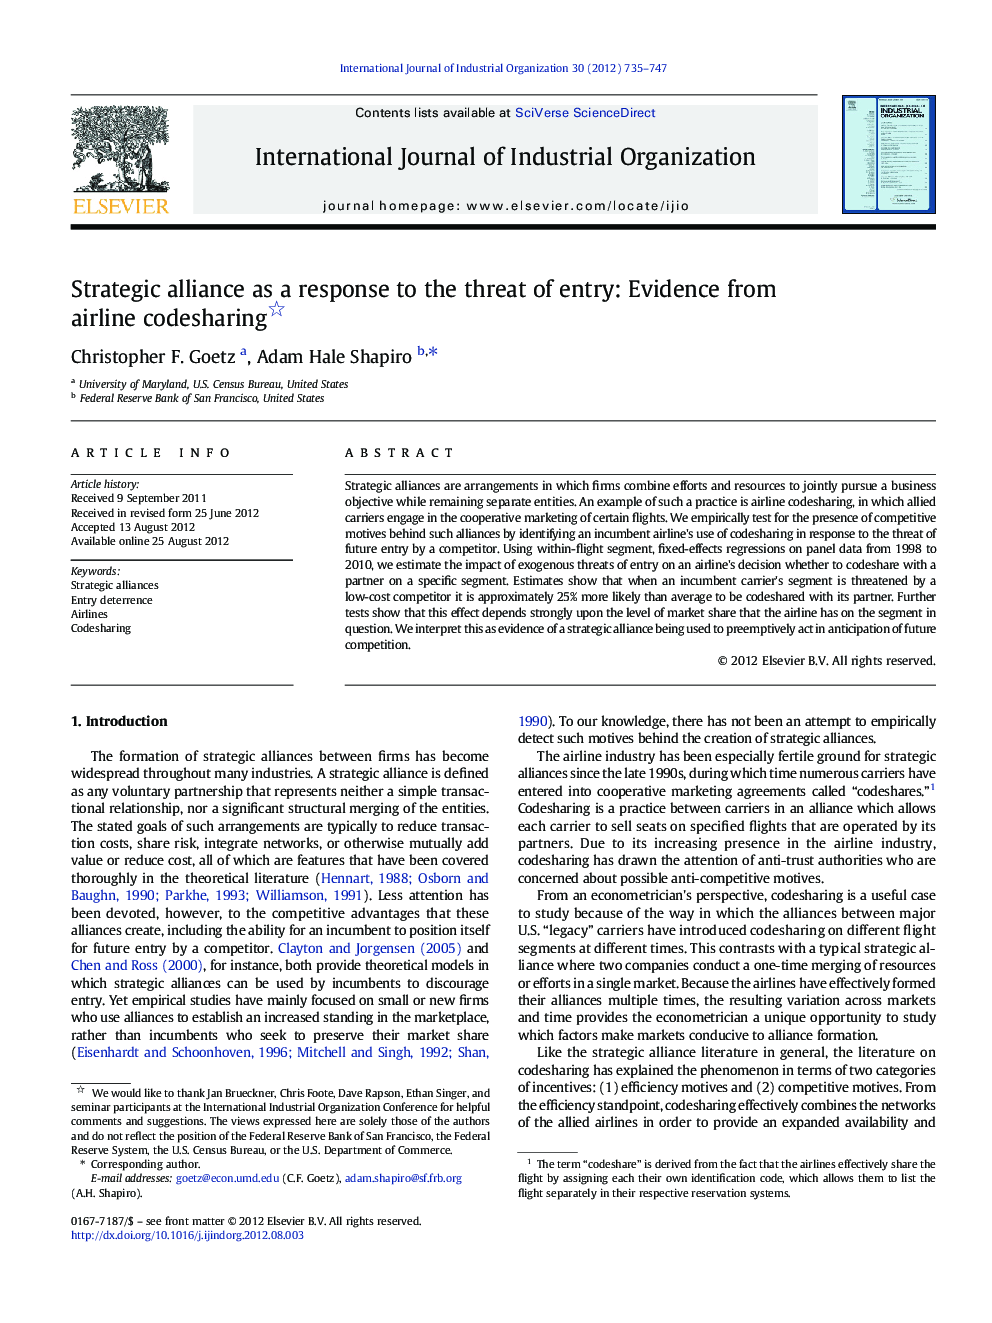 Strategic alliance as a response to the threat of entry: Evidence from airline codesharing